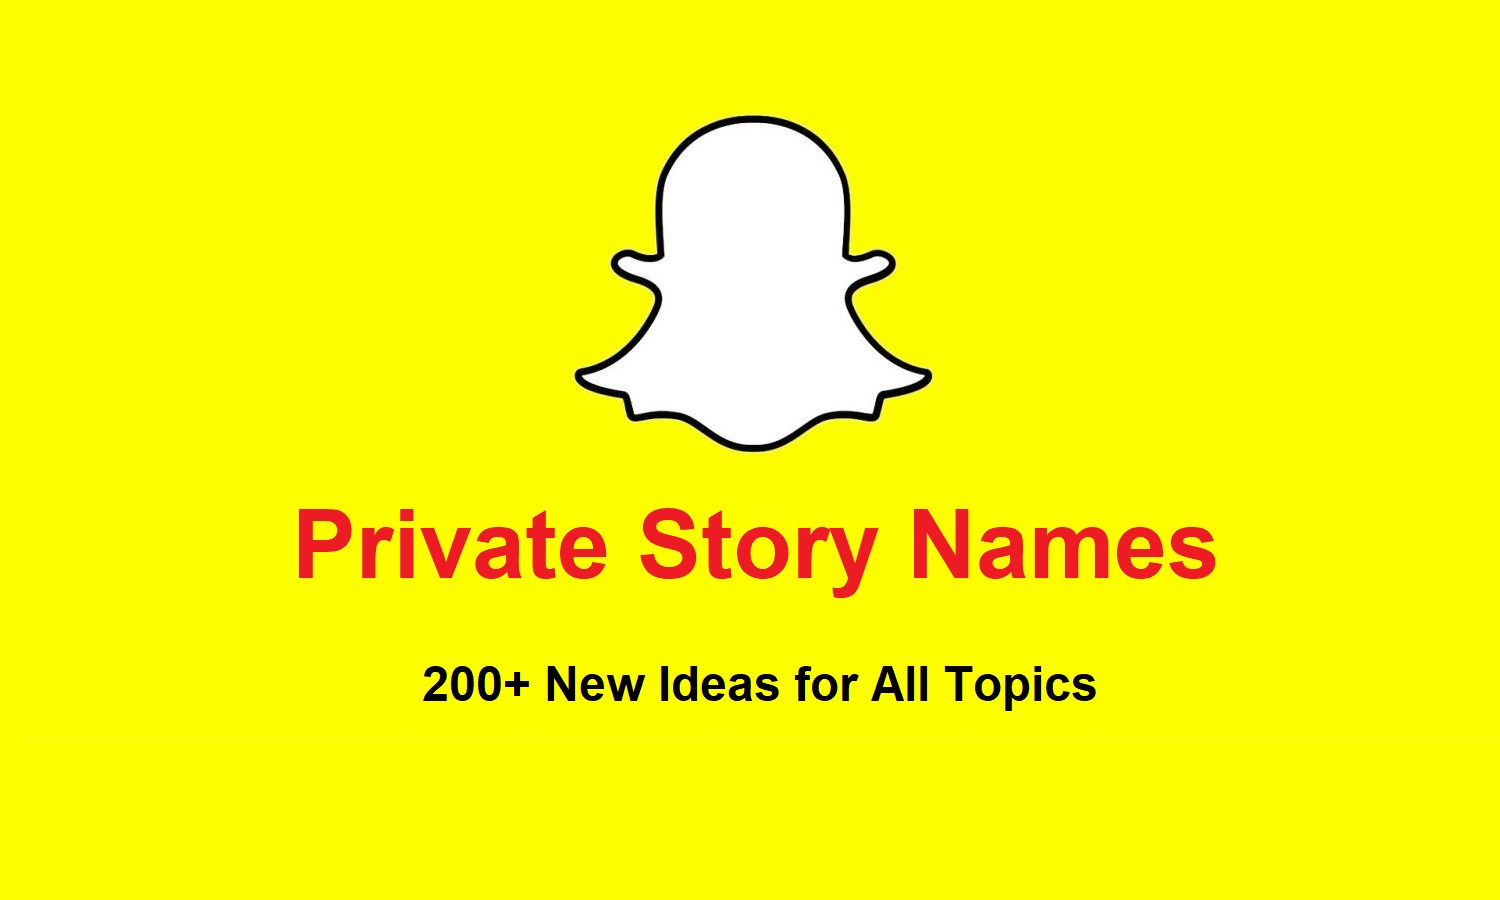 Private Story Names: 200+ New Ideas for All Topics